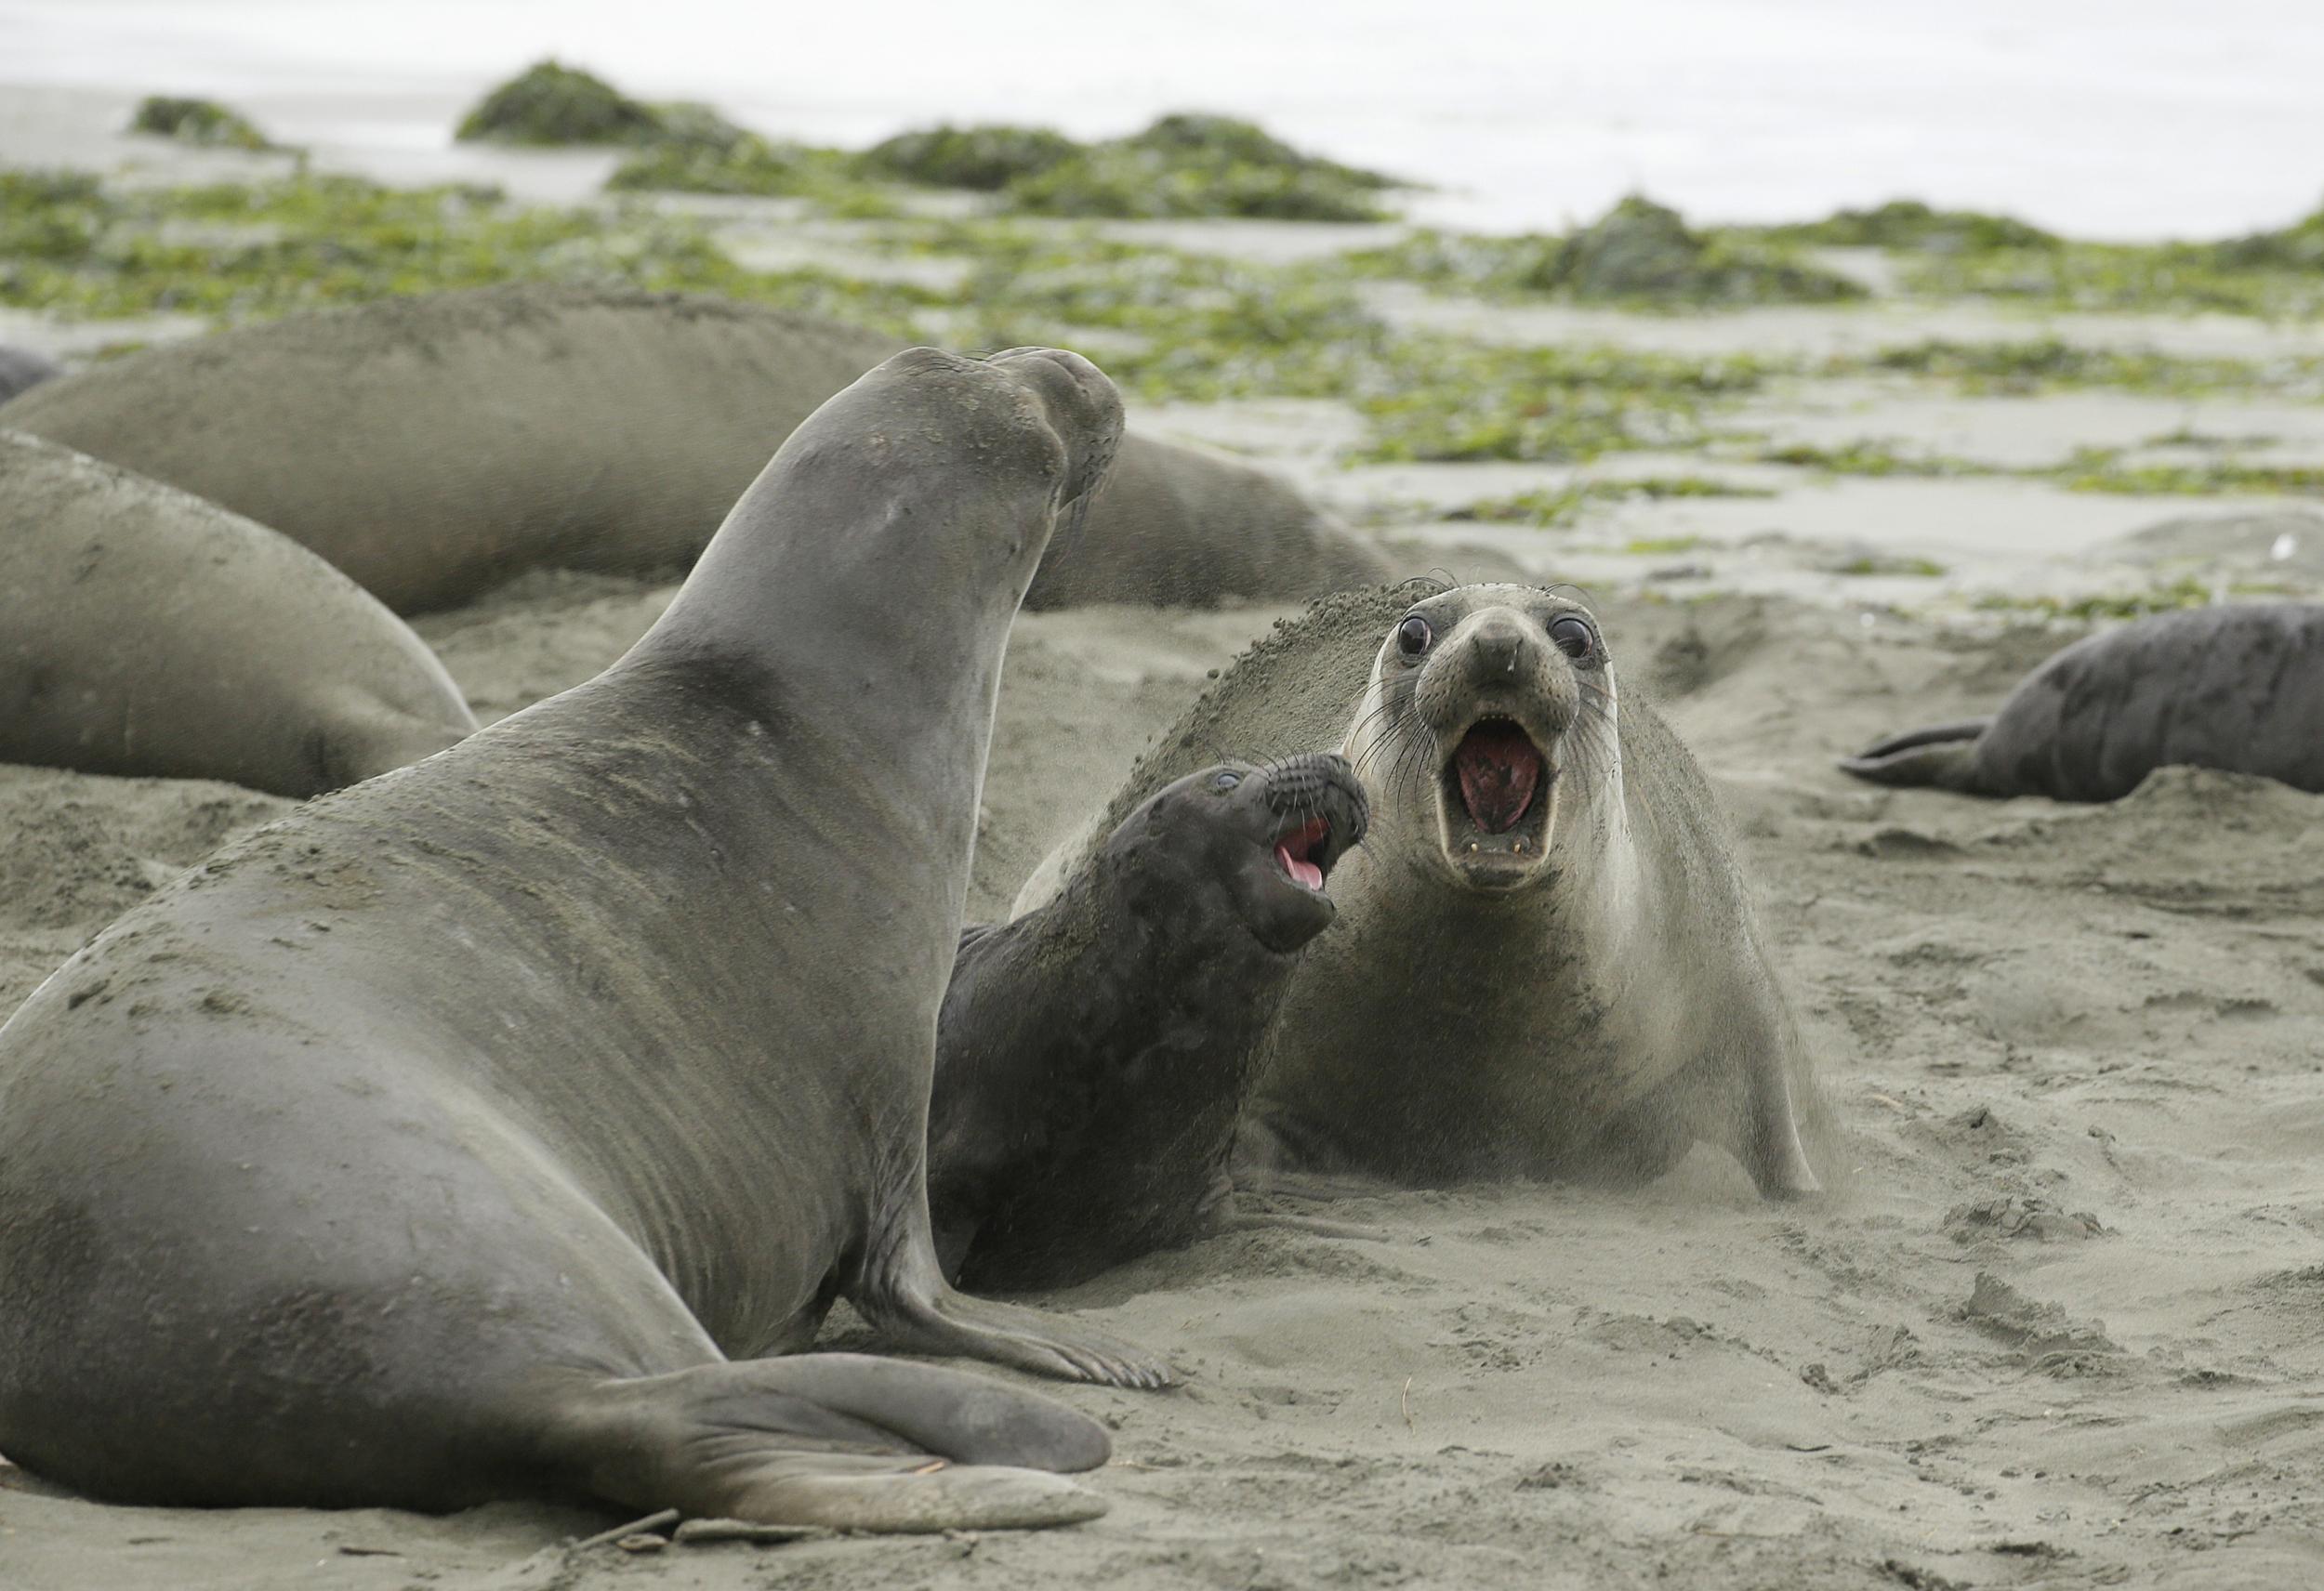 Officials grapple with herd of elephant seals who gave birth and took over a beach during government shutdown